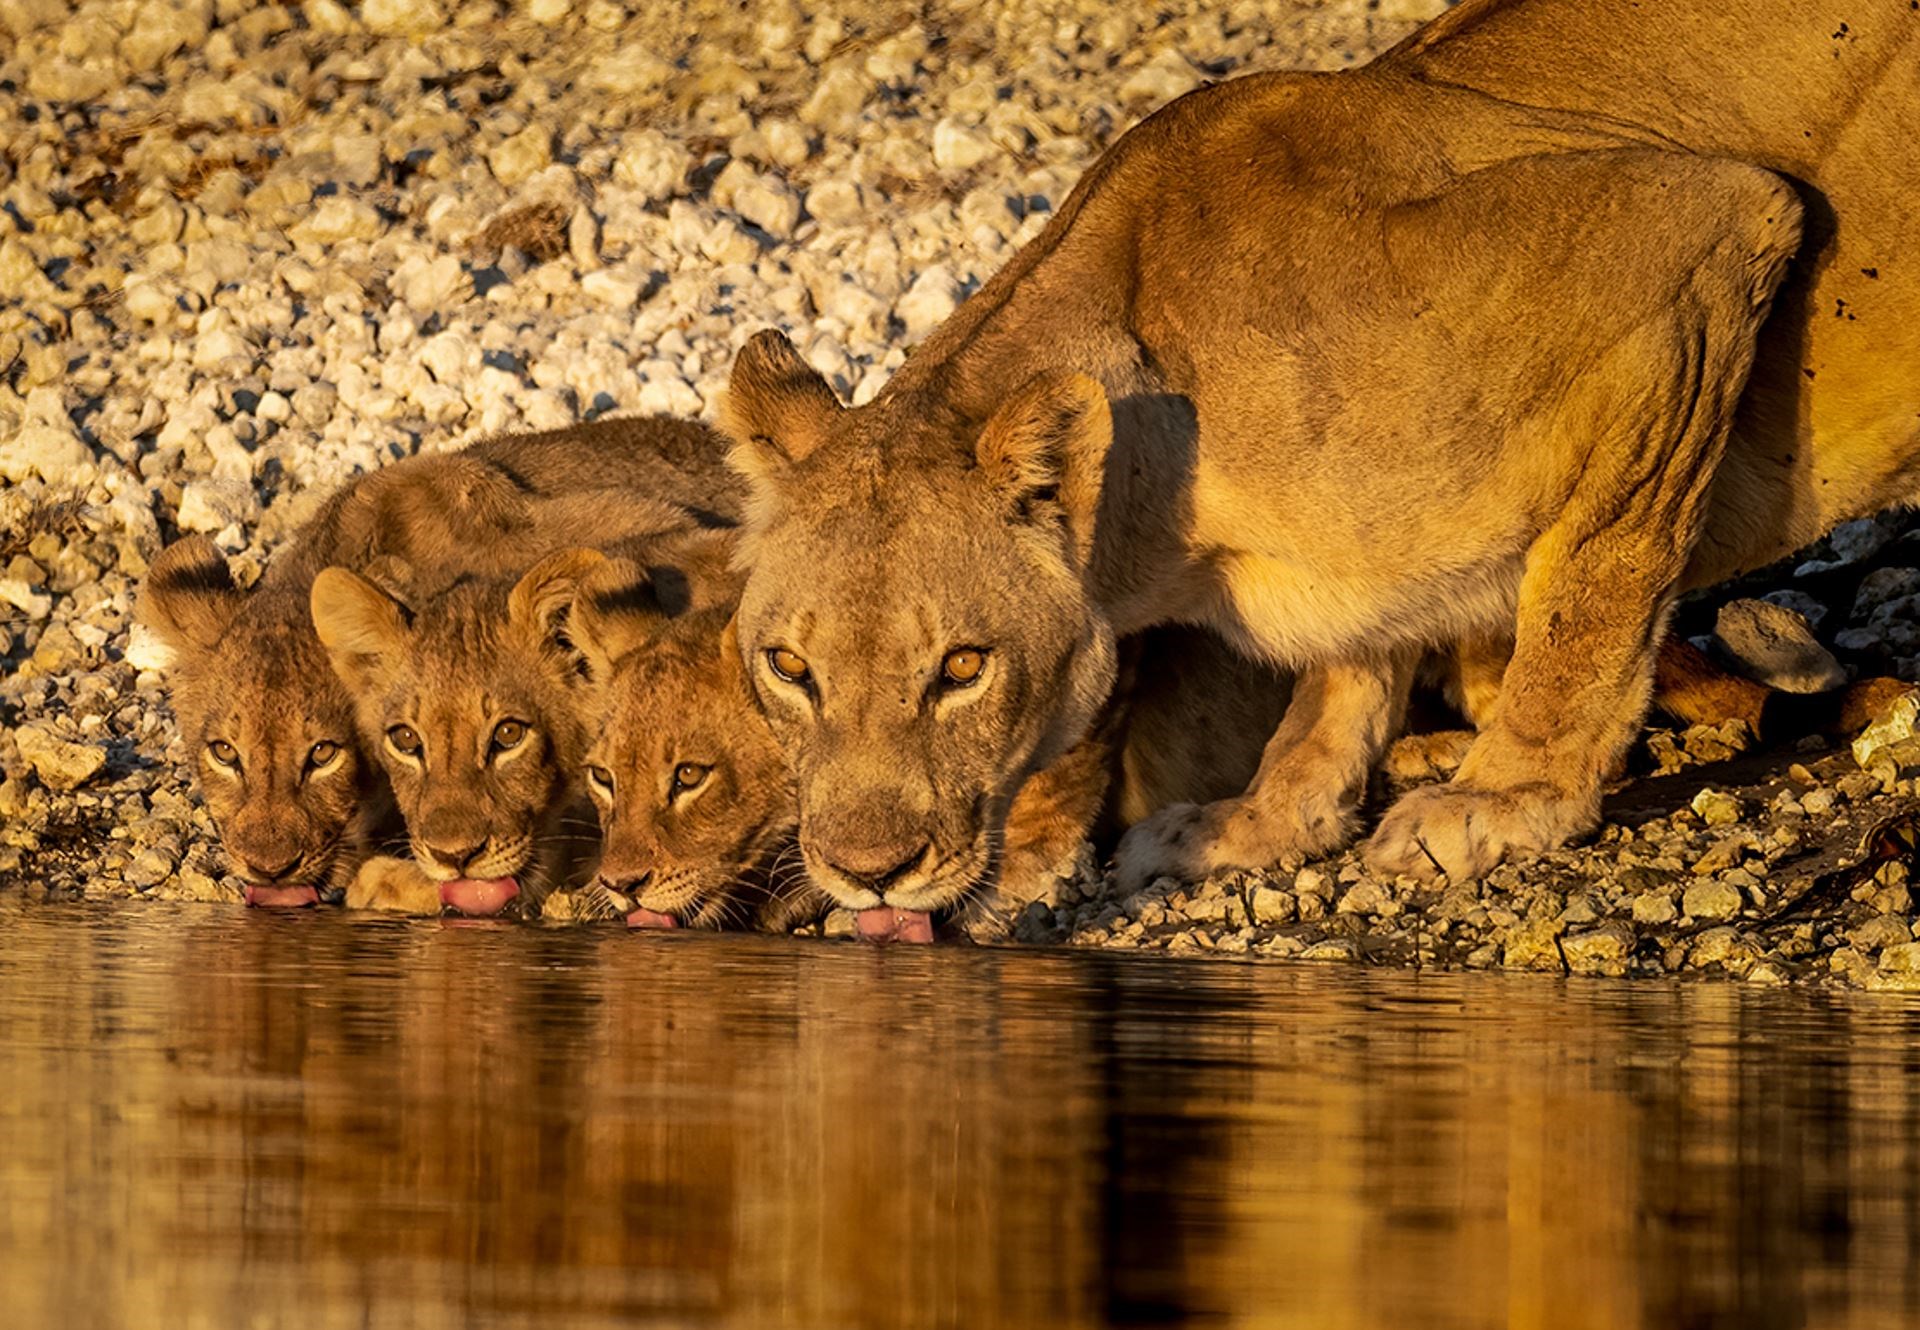 Family drinks? Lioness with cubs by Owen Cochrane, as shown to the camera club.